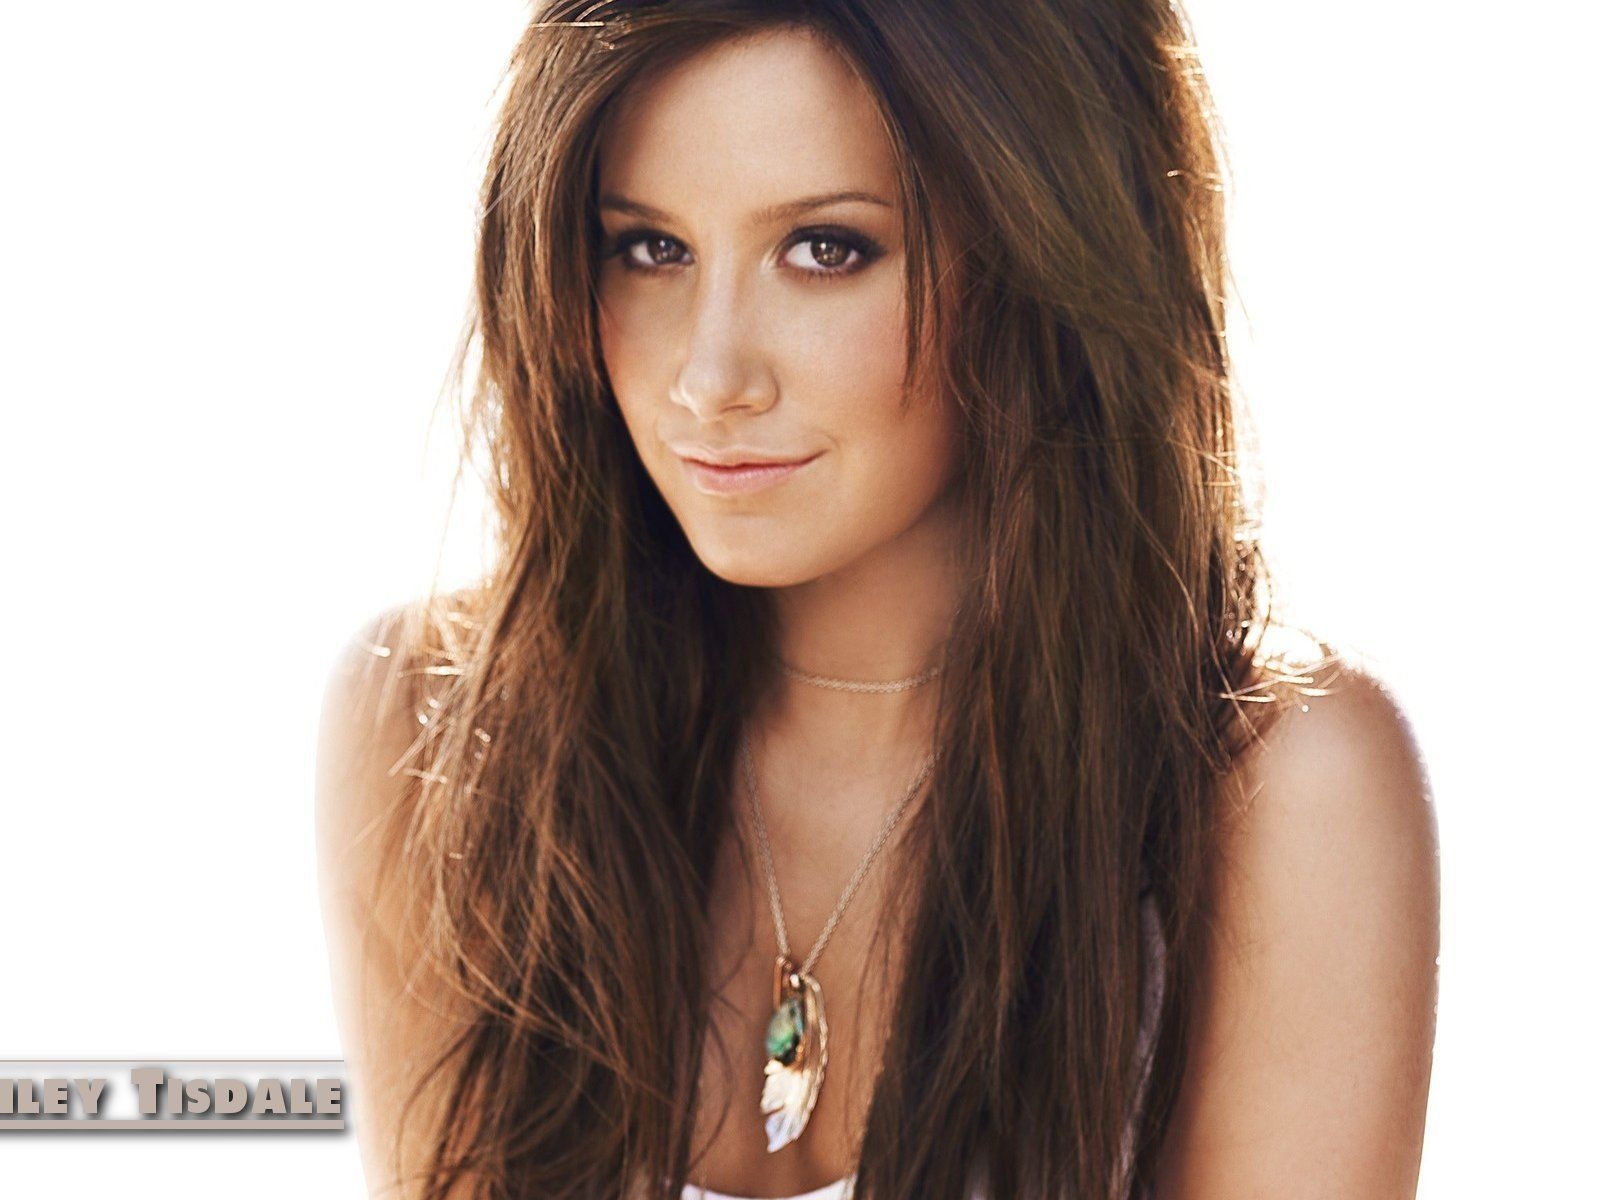 Ashley Tisdale #002 - 1600x1200 Wallpapers Pictures Photos Images